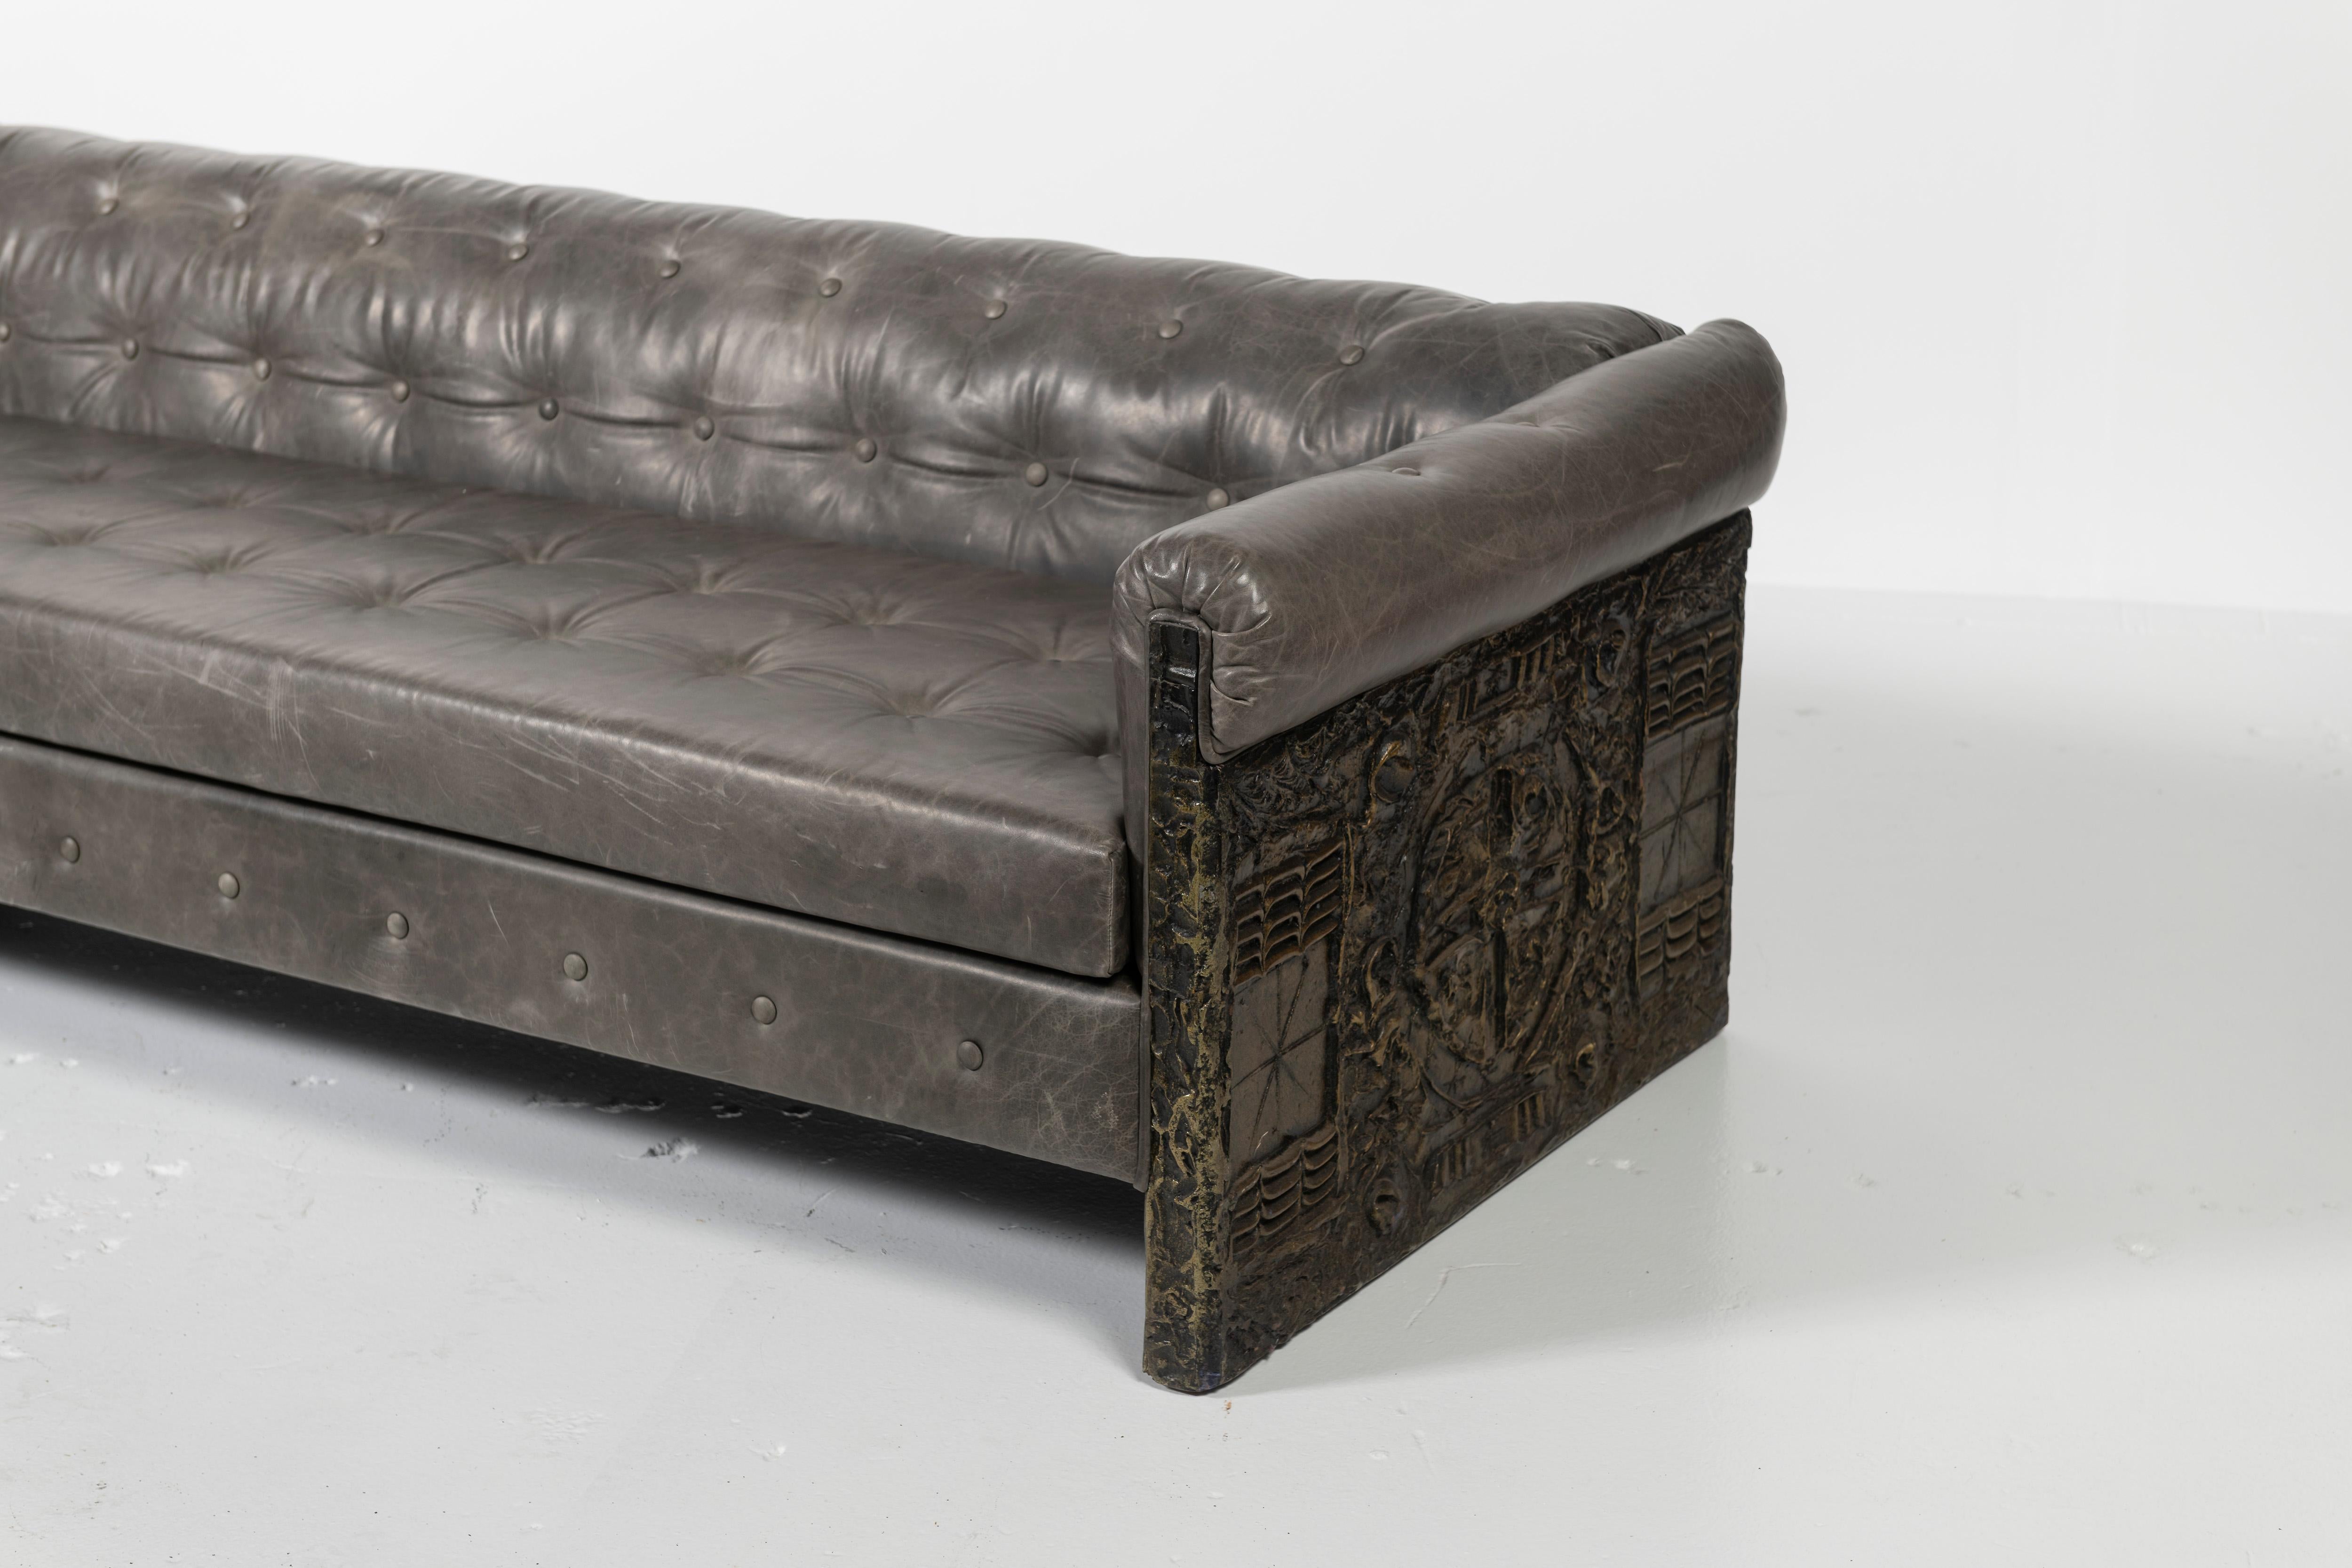 Highly desired Adrian Pearsall sofa, this button-tufted gray leather upholstered sofa has molded and bronzed poly-resin panels on the ends in the Brutalist-style. All materials are original. The seat cushion is non-reversible with a block foam